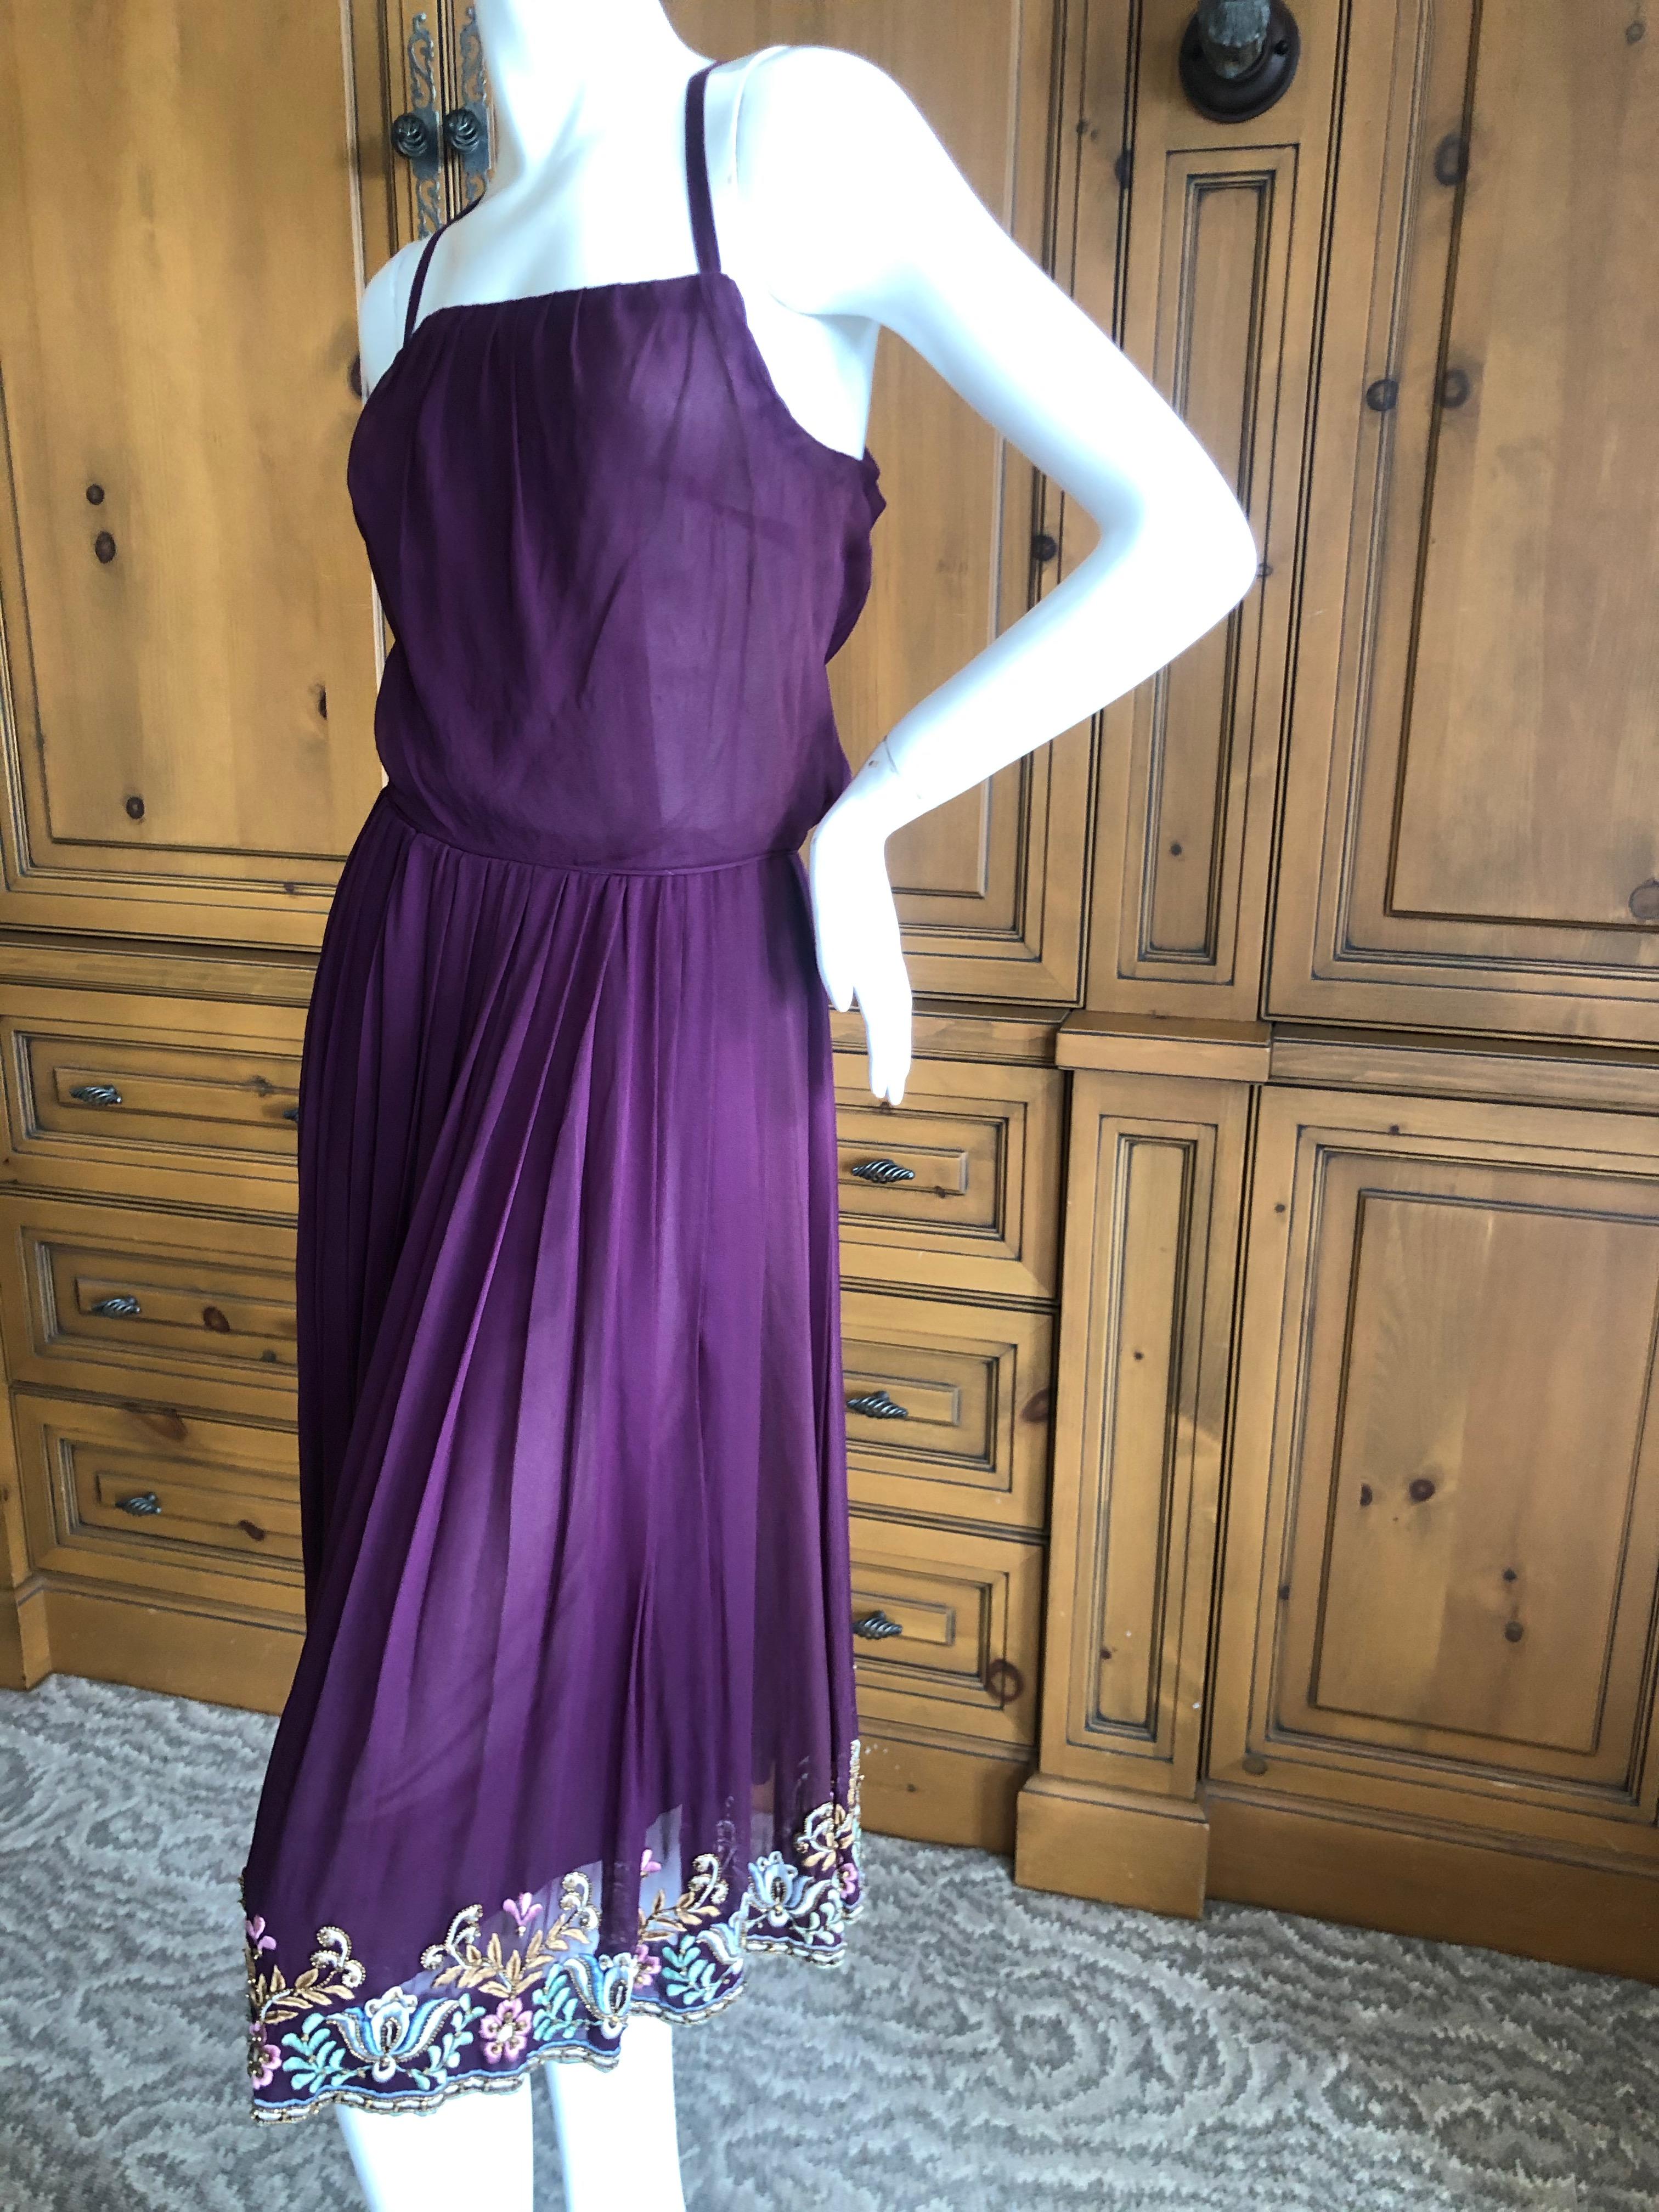 Christian Dior London 1960's Numbered Haute Couture Dress w Lesage Embellishment For Sale 2